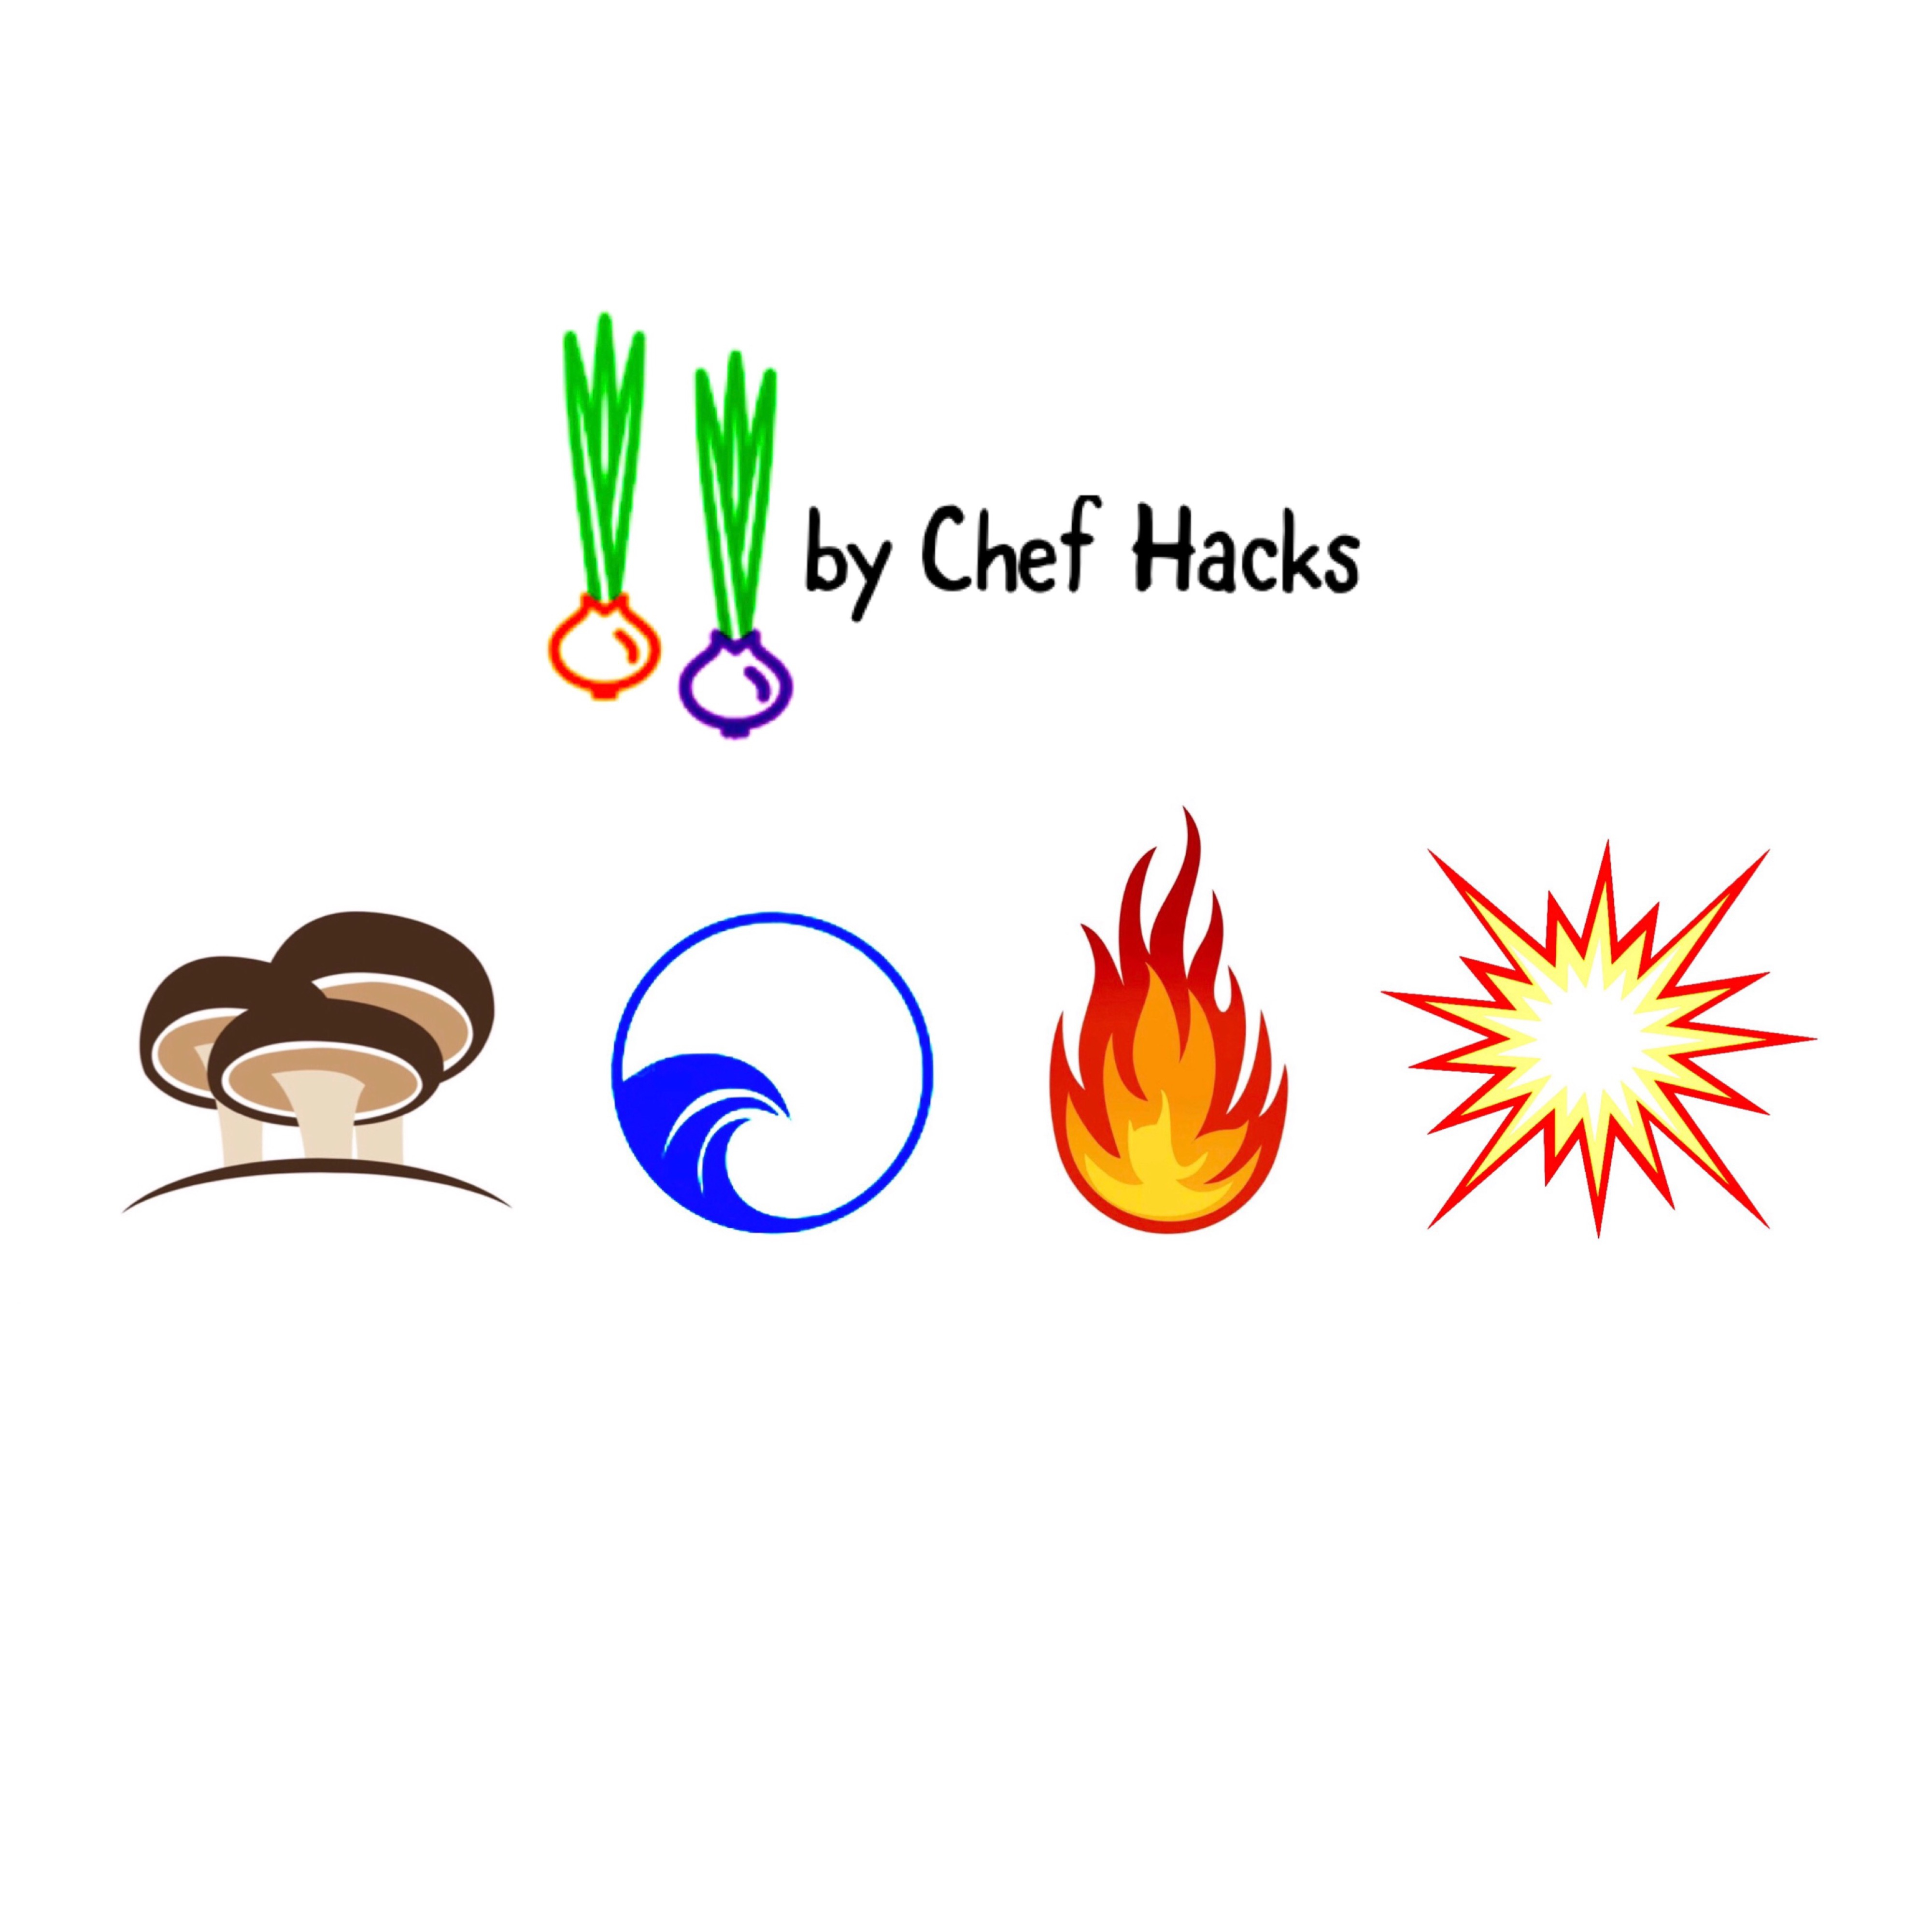 by Chef Hacks